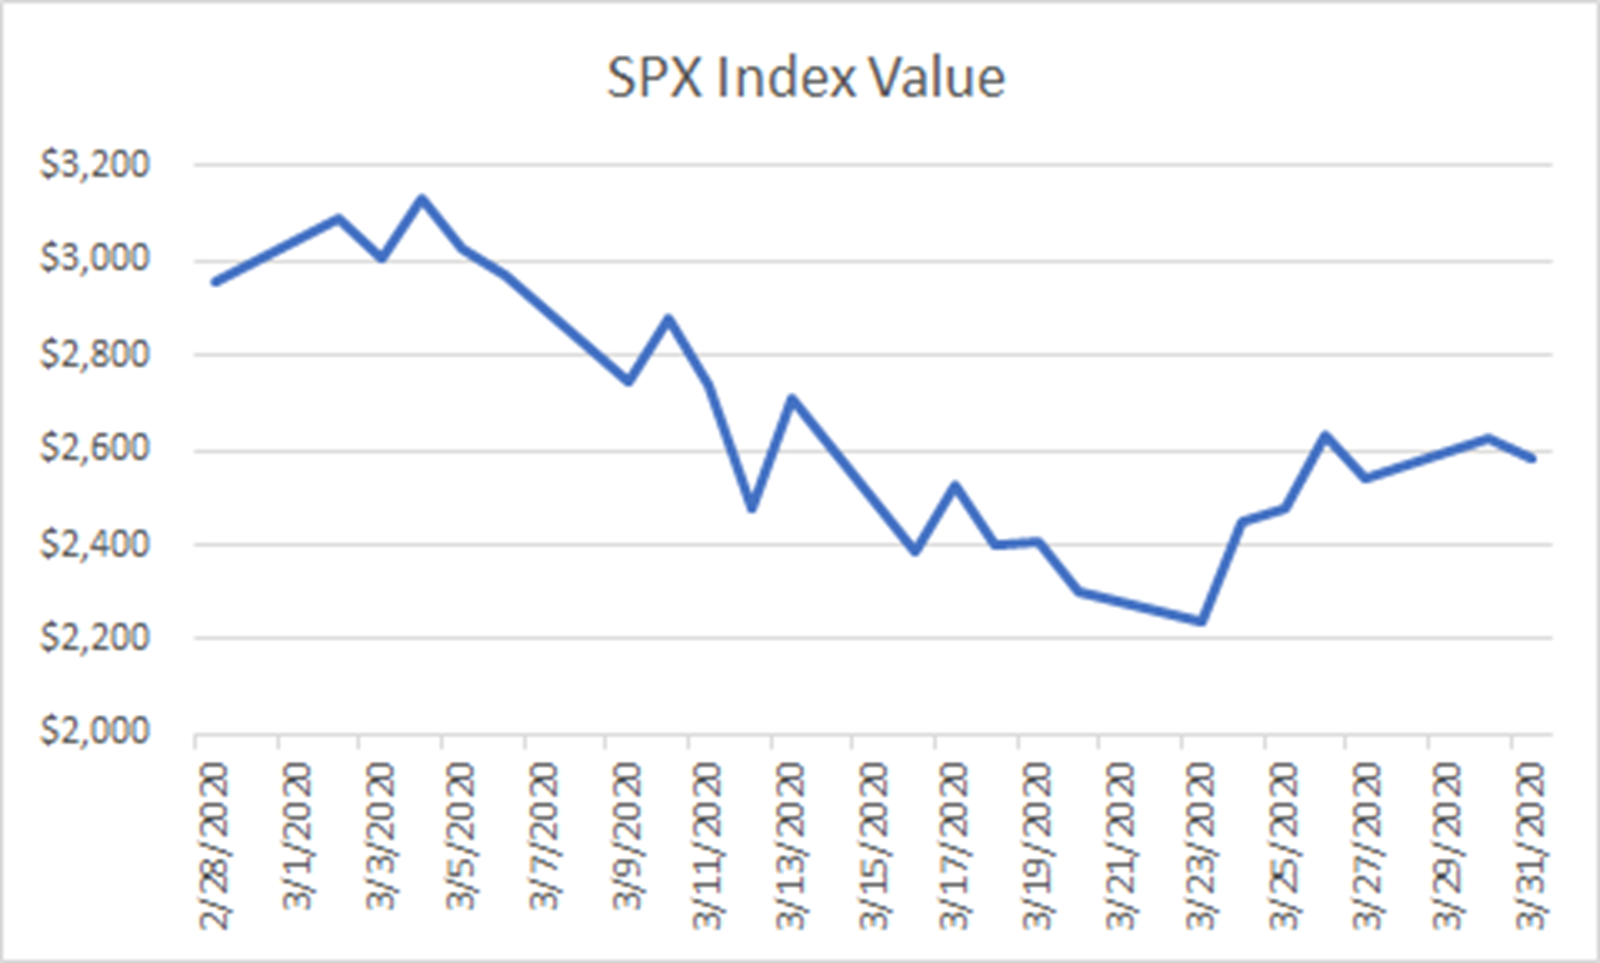 Line graph depicting SPX Index Value from February 28, 2020 to March 31, 2020